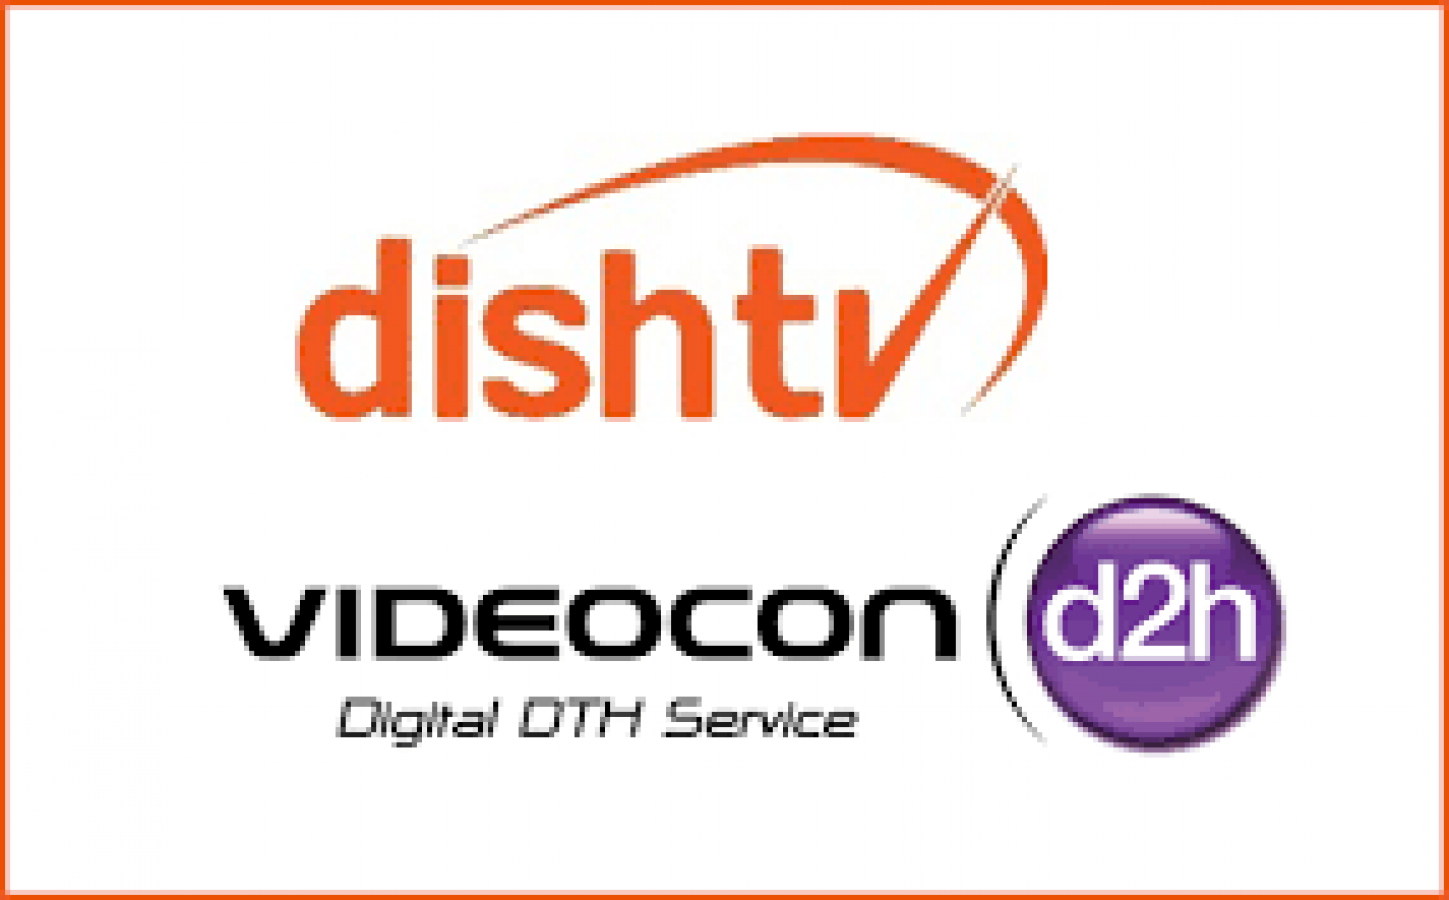 Discussion - All DTH Services Old Logos | DreamDTH Forums - Television  Discussion Community